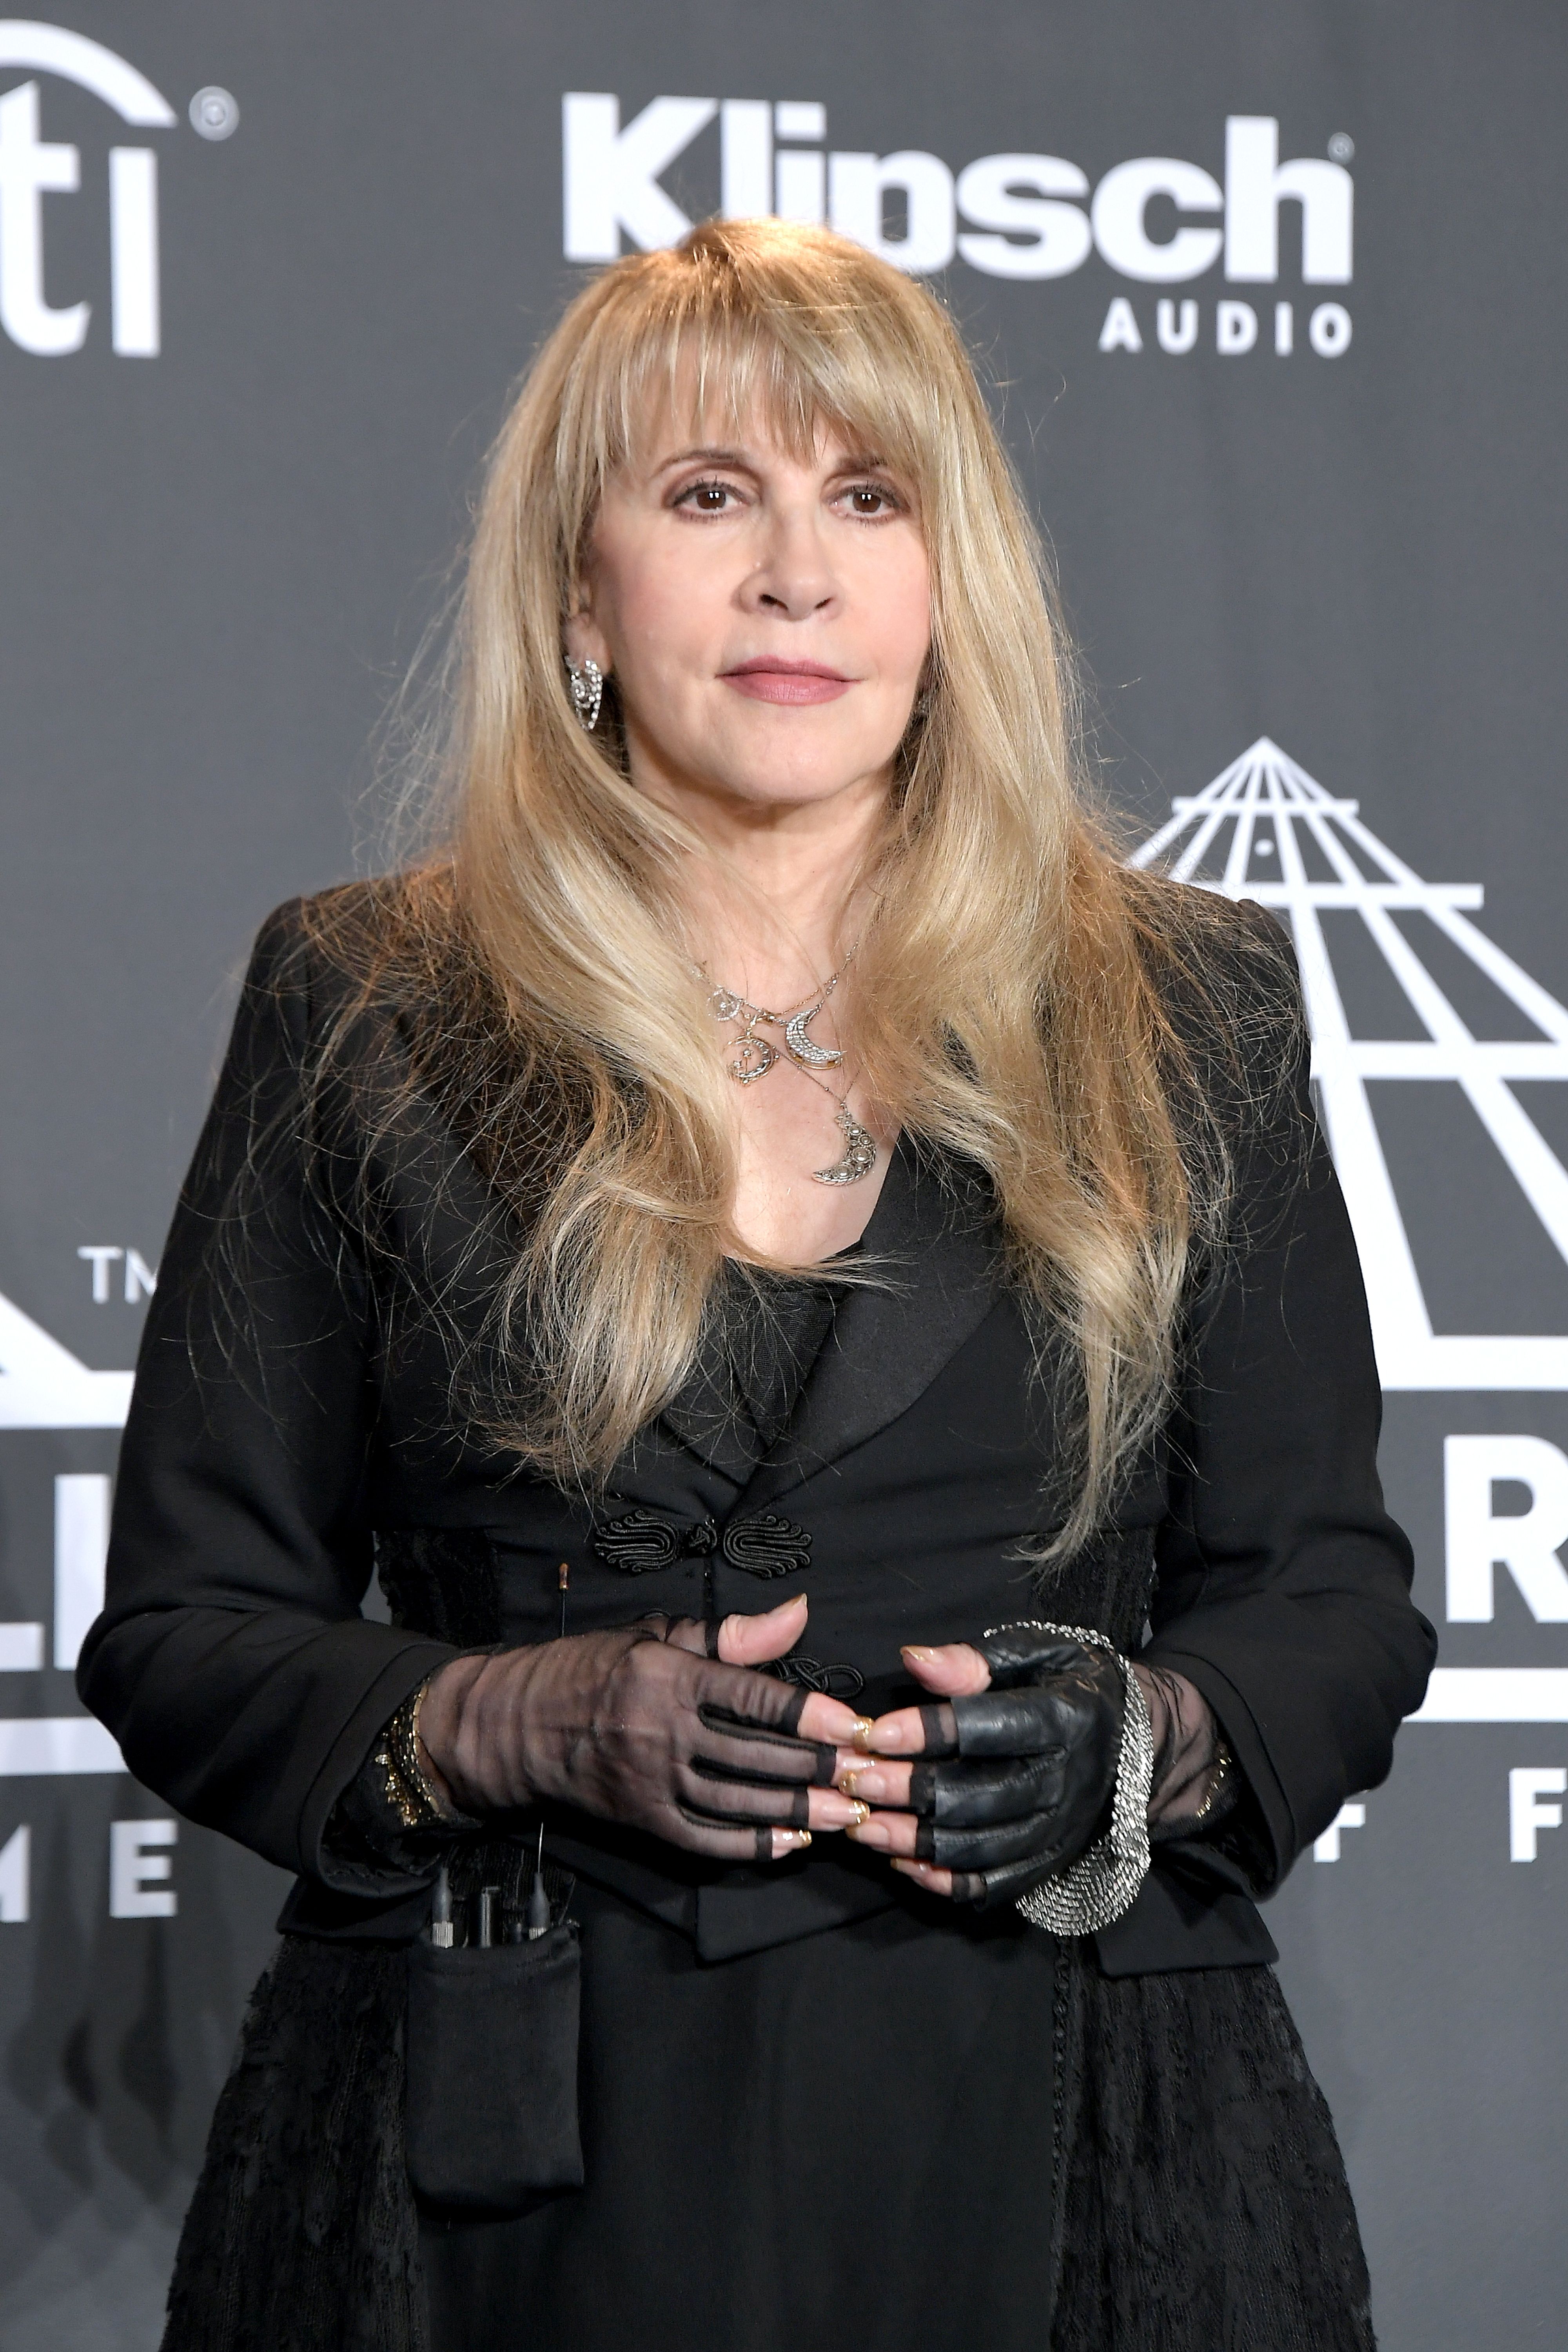 Stevie Nicks during the 2019 Rock & Roll Hall Of Fame Induction Ceremony at Barclays Center on March 29, 2019 in New York City. | Source: Getty Images